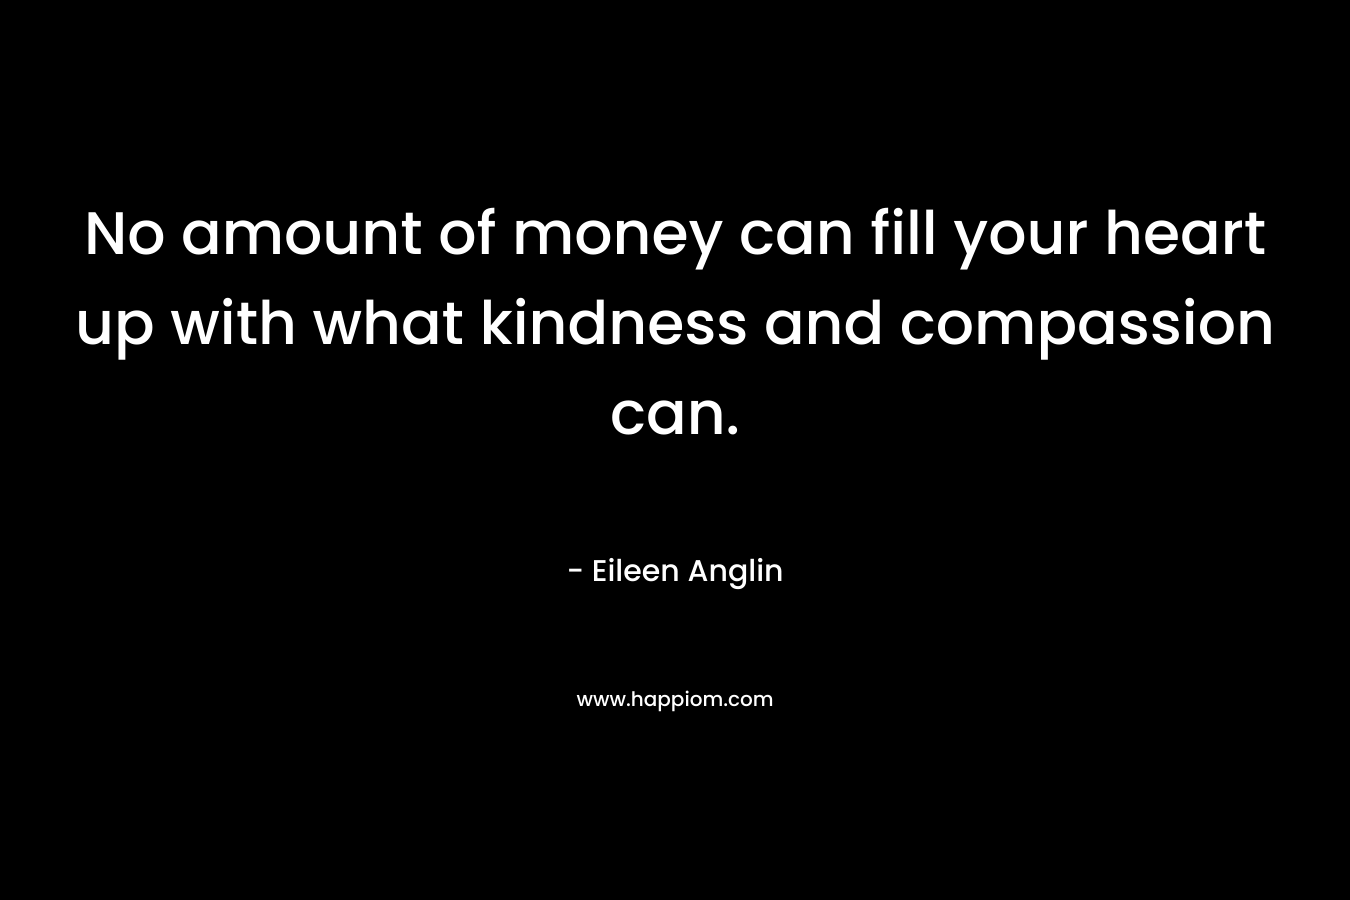 No amount of money can fill your heart up with what kindness and compassion can. – Eileen Anglin